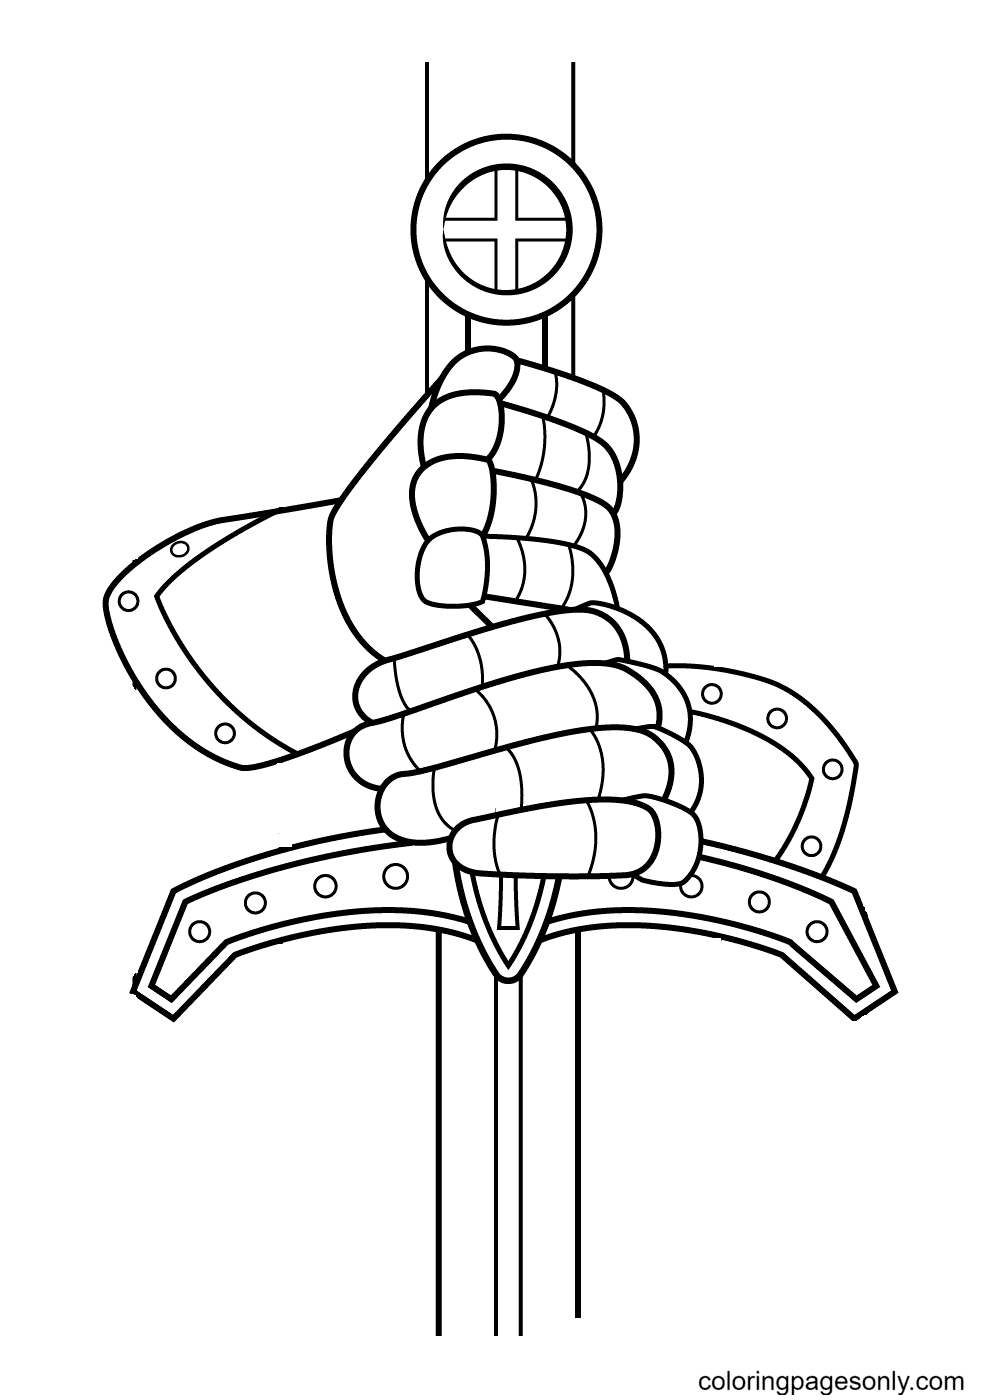 The Knight’s Hand Grasps the Sword Coloring Page